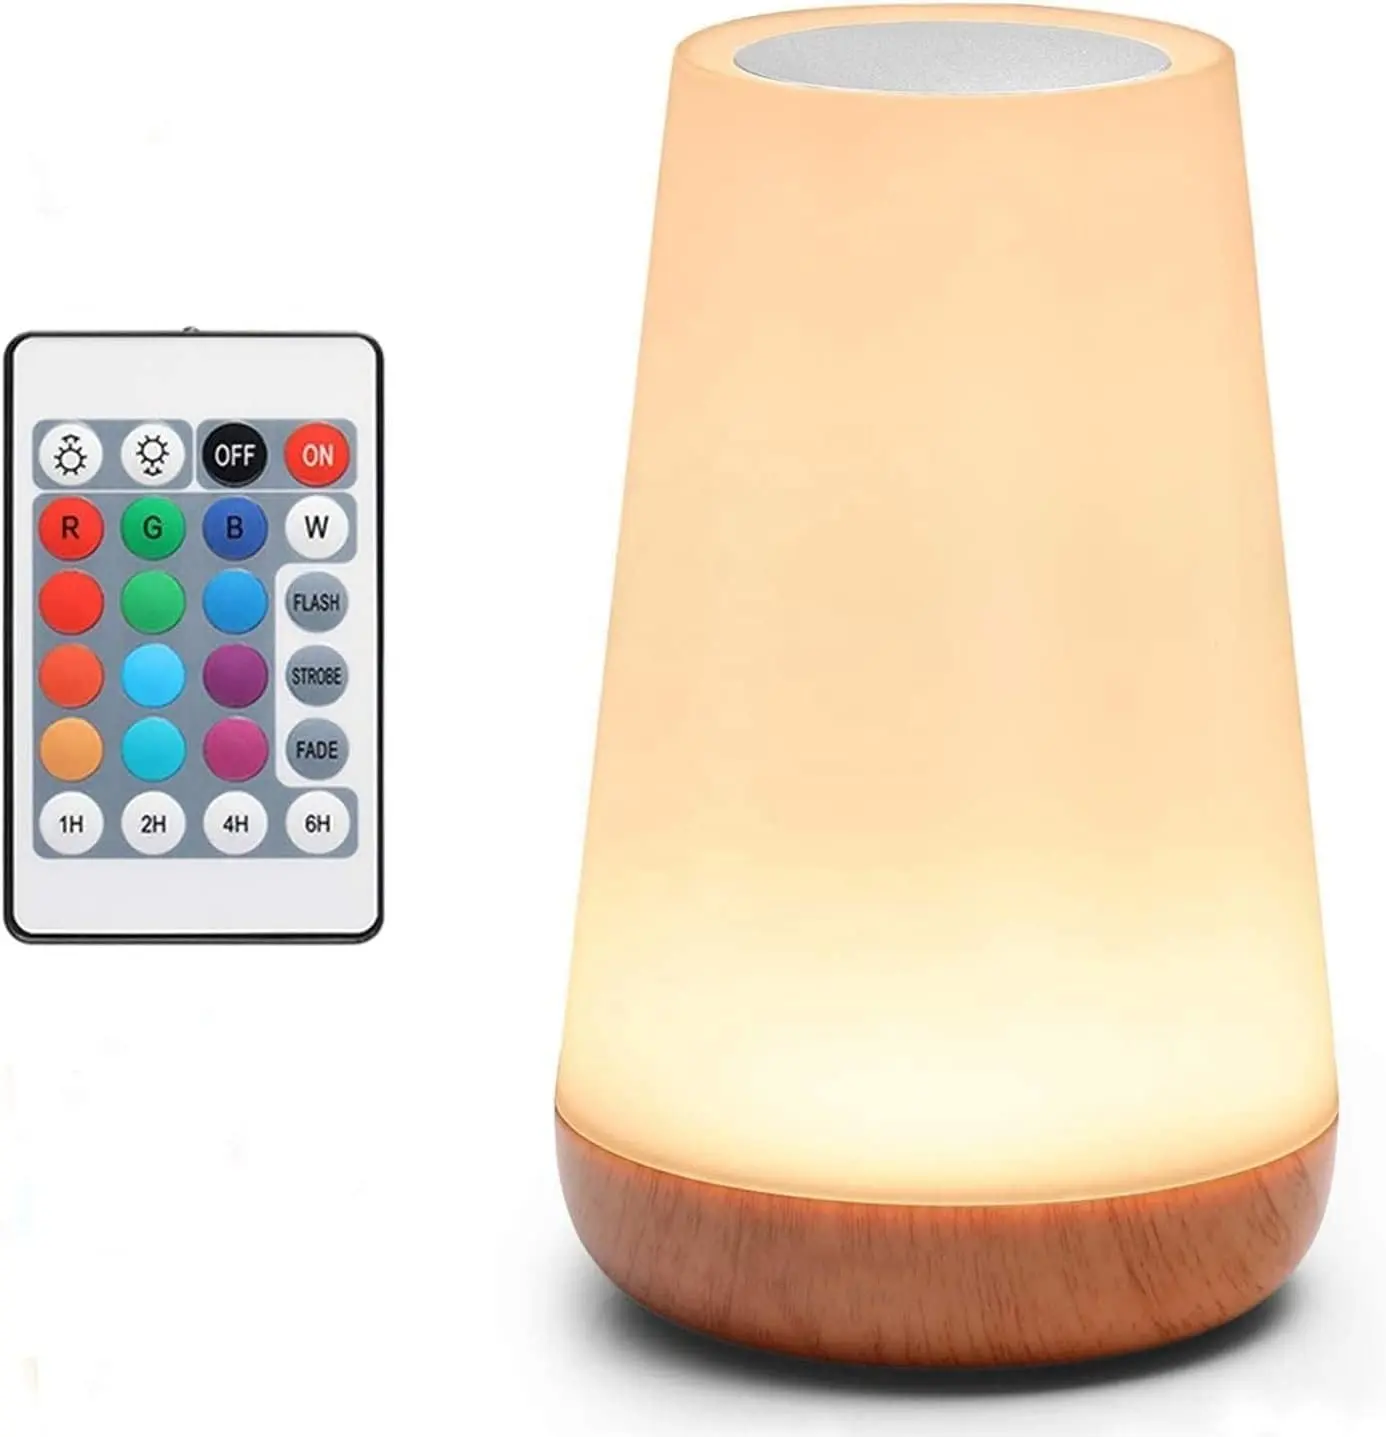 Night Light LED Touch Bedside Table Lamp Remote Control Dimmable Light with RGB Color Changing USB Rechargeable Portable Lamp